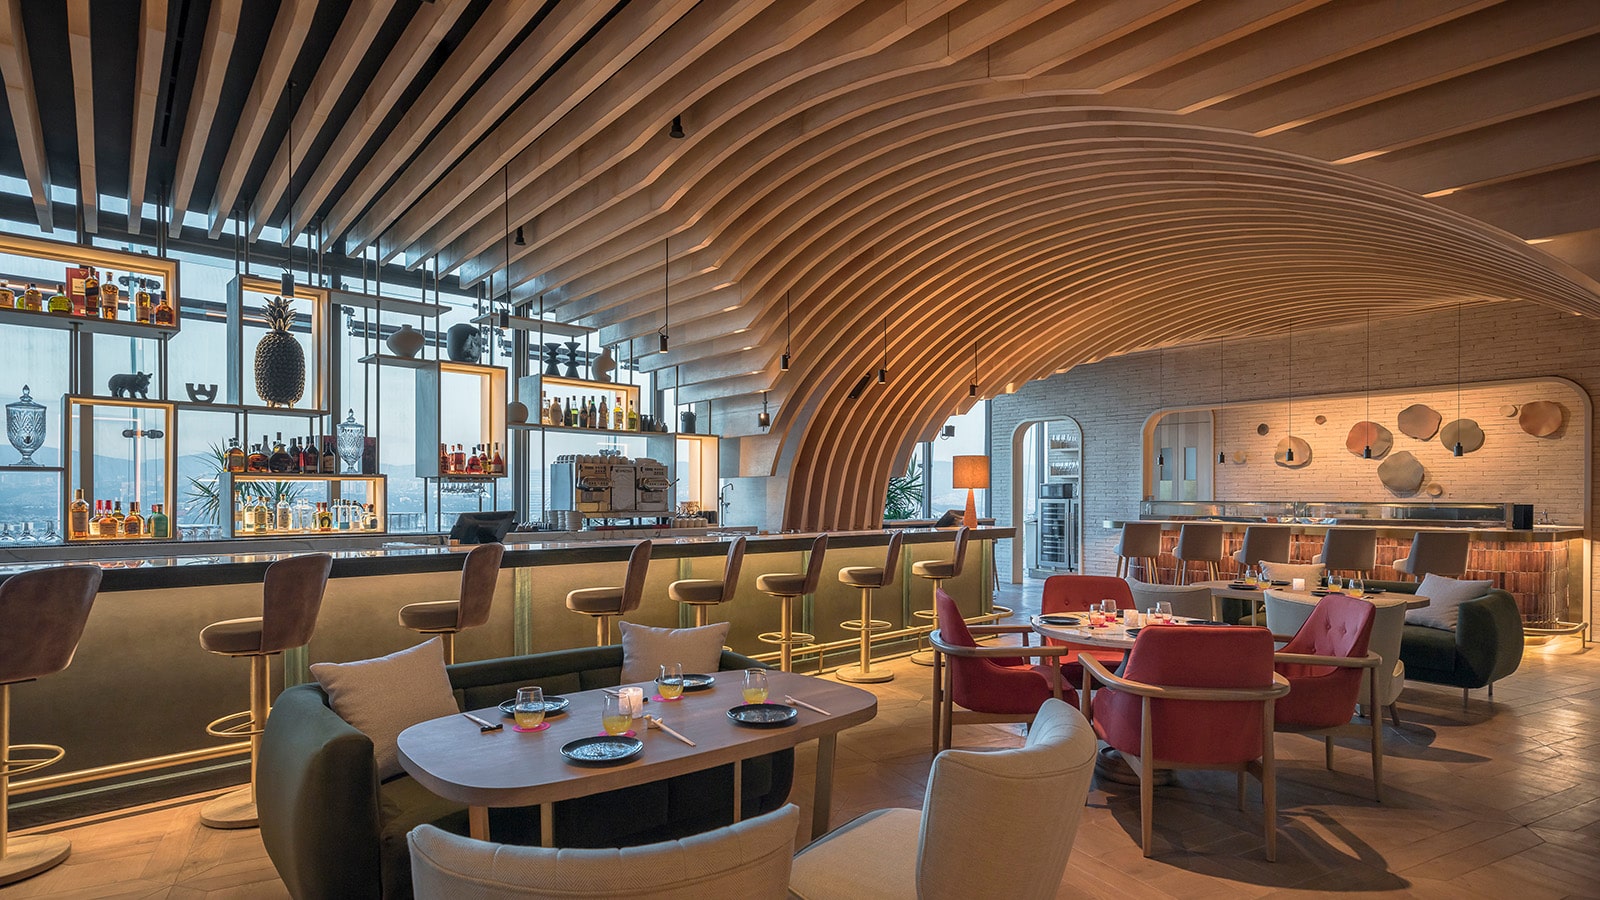 "Ling Ling Restaurant Sordo Madaleno Architecture indiaartndesign"